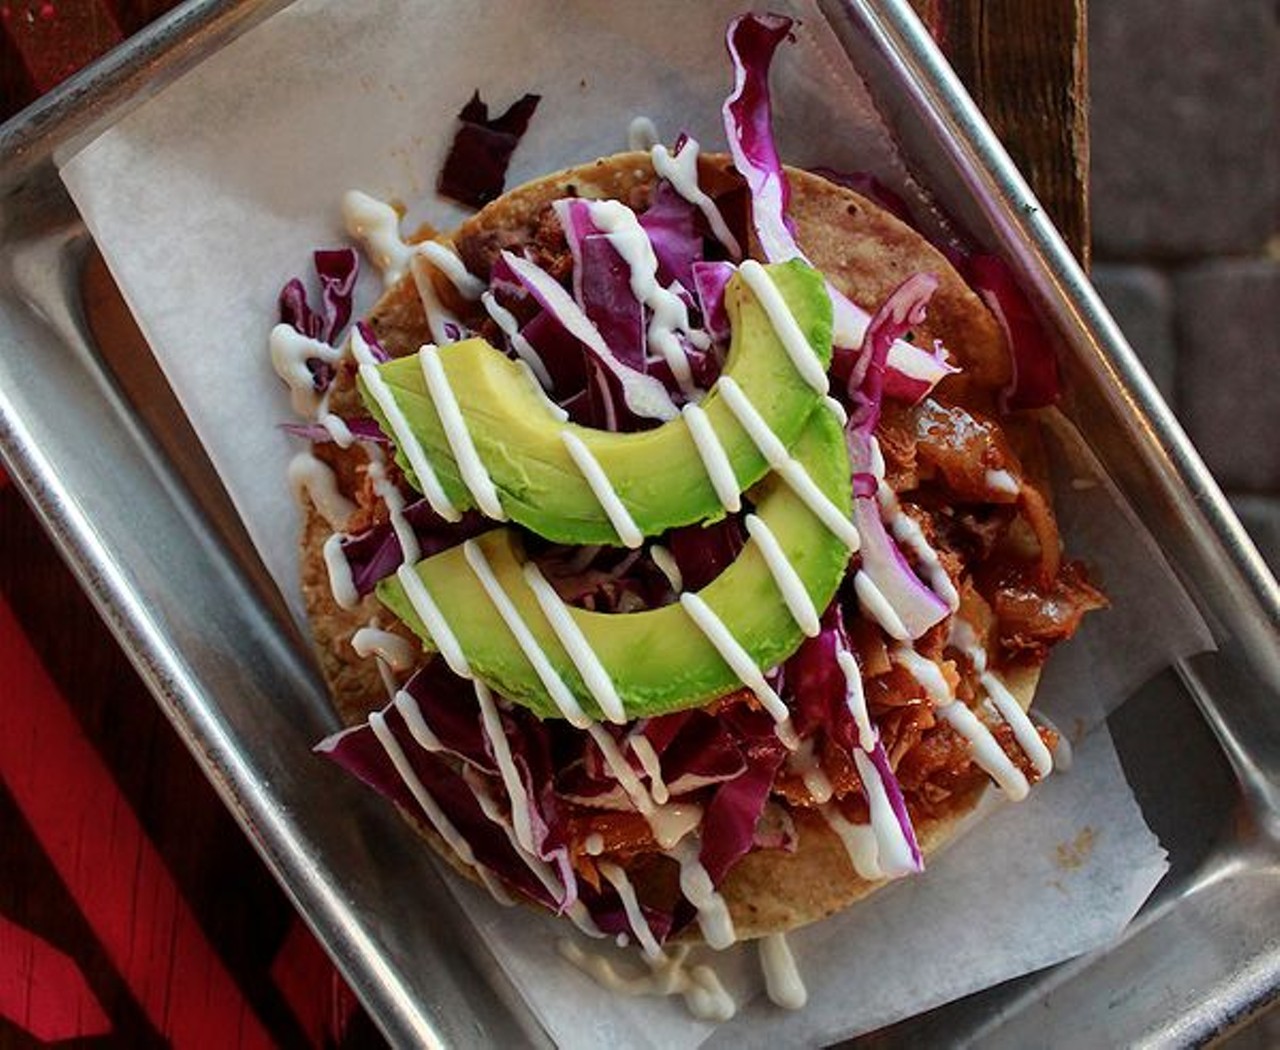 Be sure to try the tinga tostada with chicken or vegetables.
Photo via Lindsey Thompson